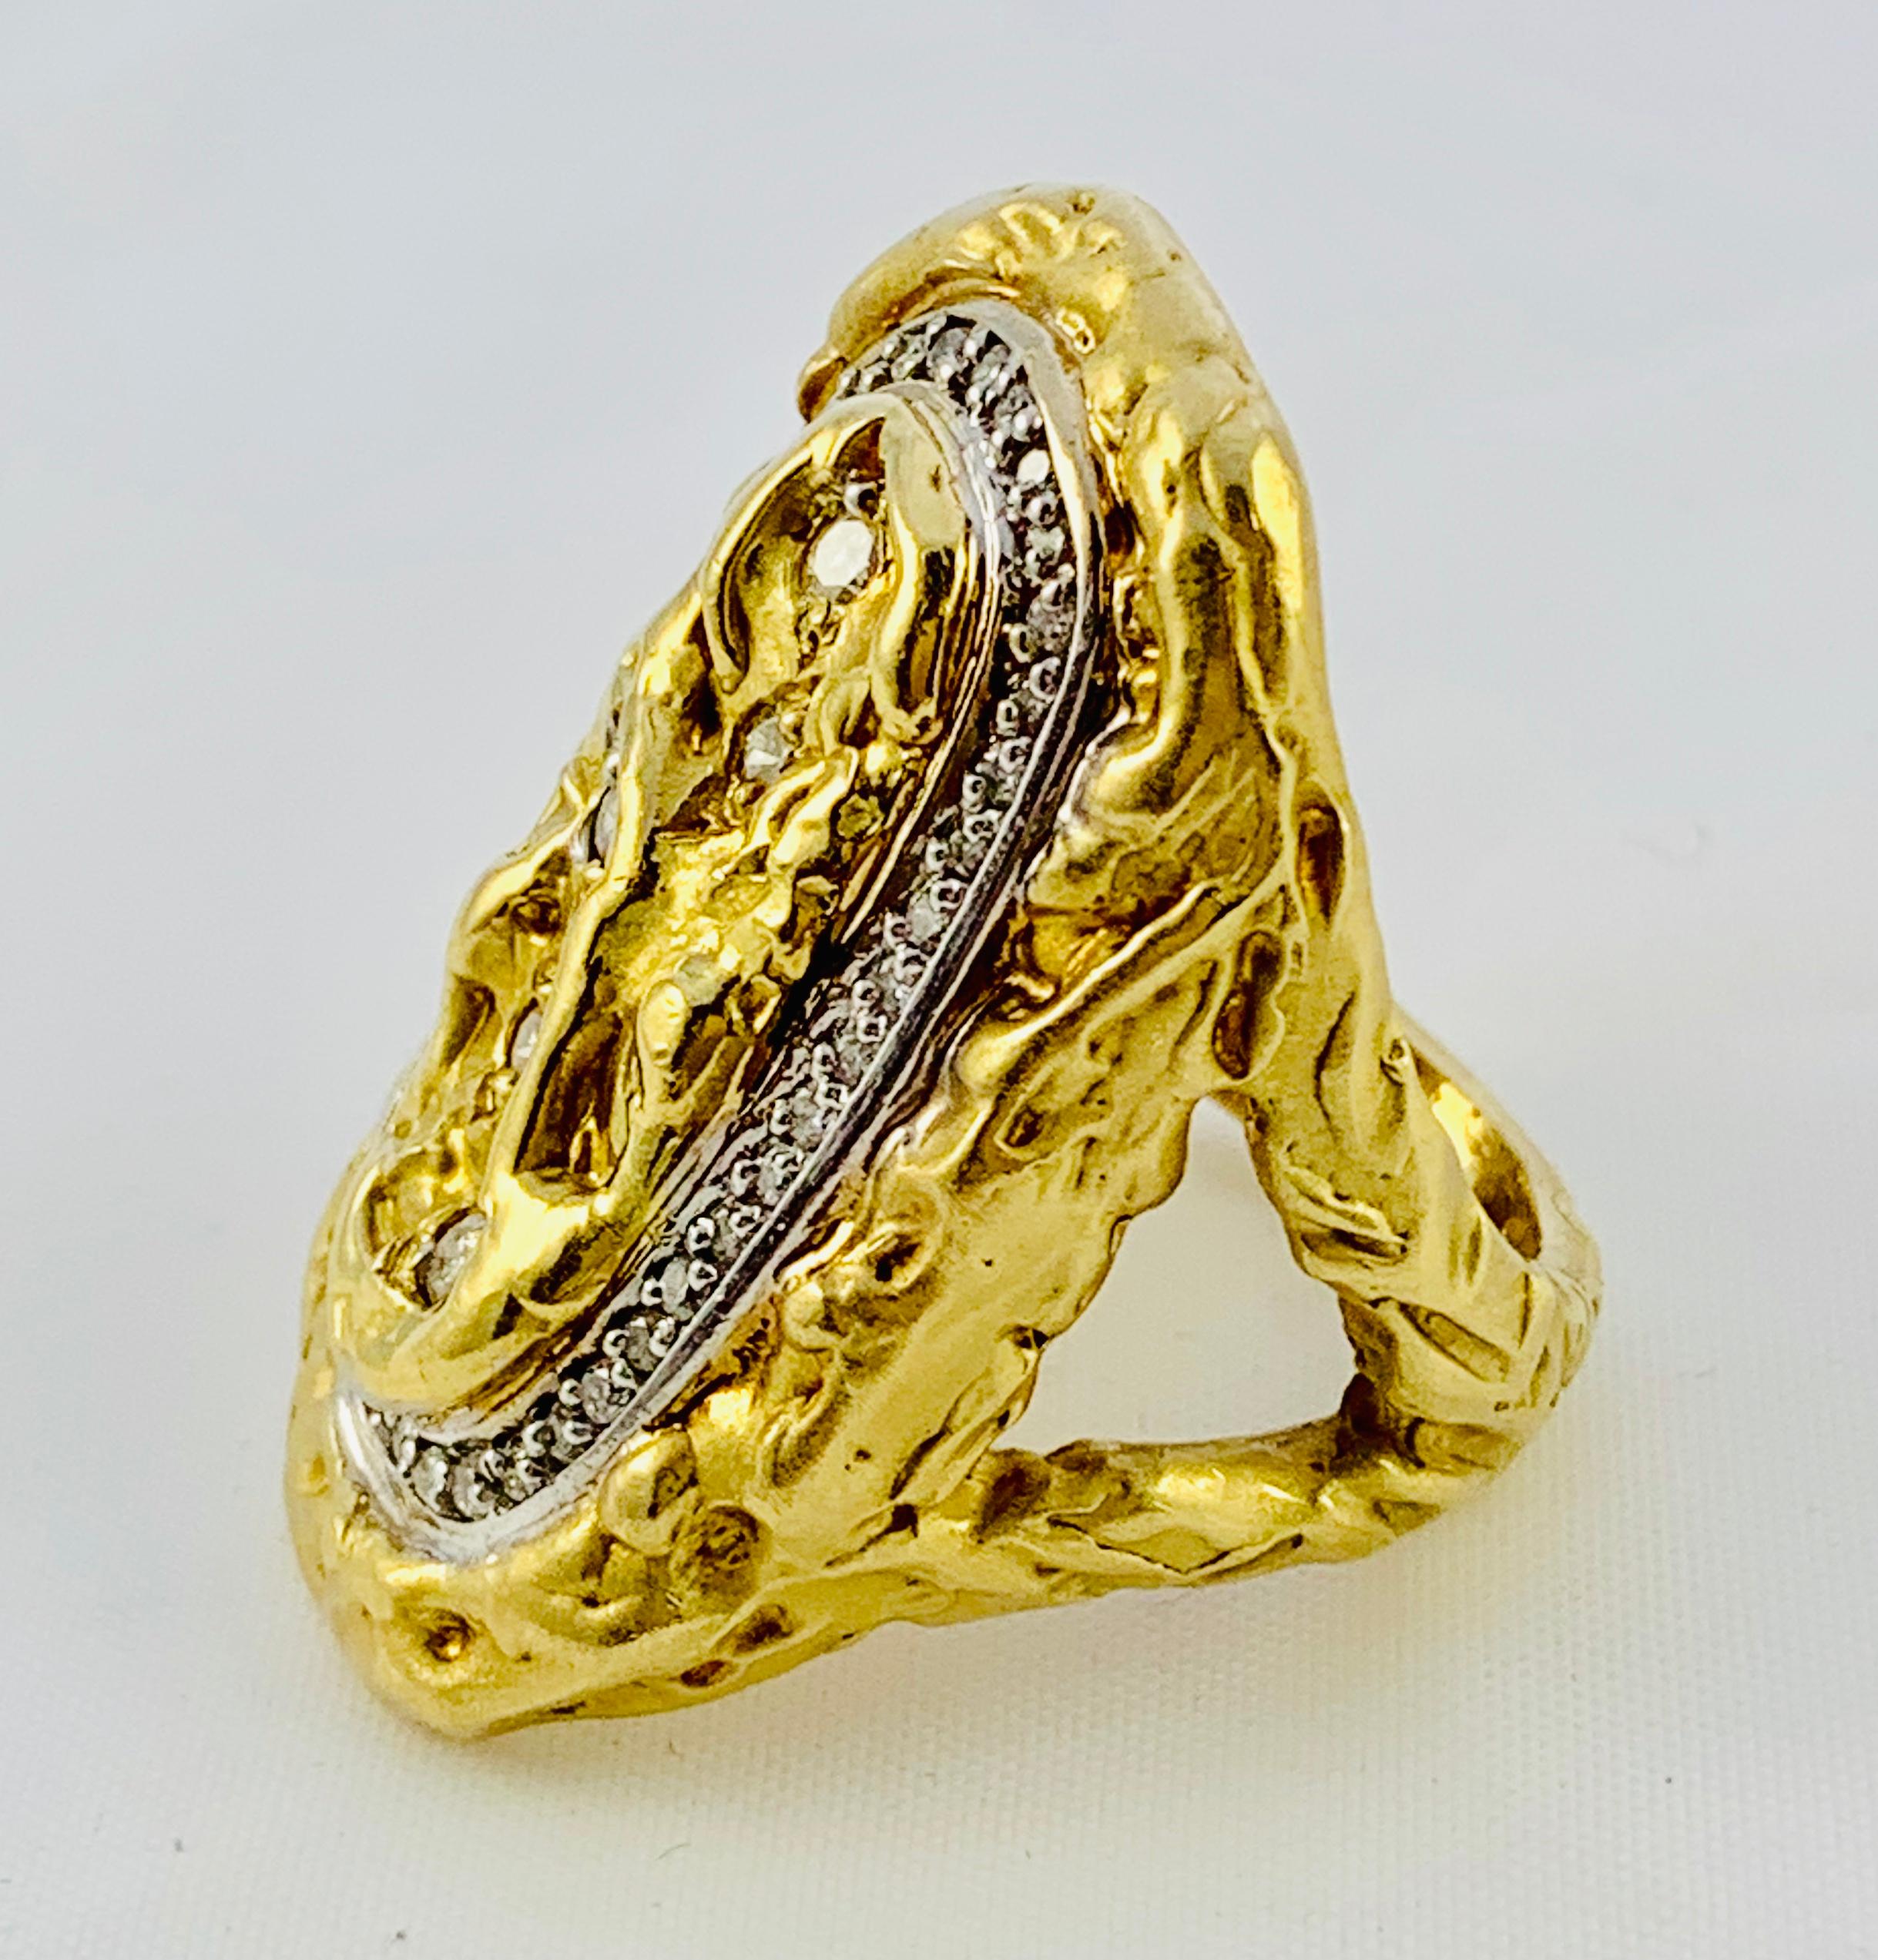 Absolutely Gorgeous Saddle Ring! Made in beautifully Carved 18K yellow Gold and features an oval rim of diamonds that frame in 5 larger round diamonds in the center. The size of the ring is 6.25, it weighs 18.8 grams. The dome measures 1.25 inches